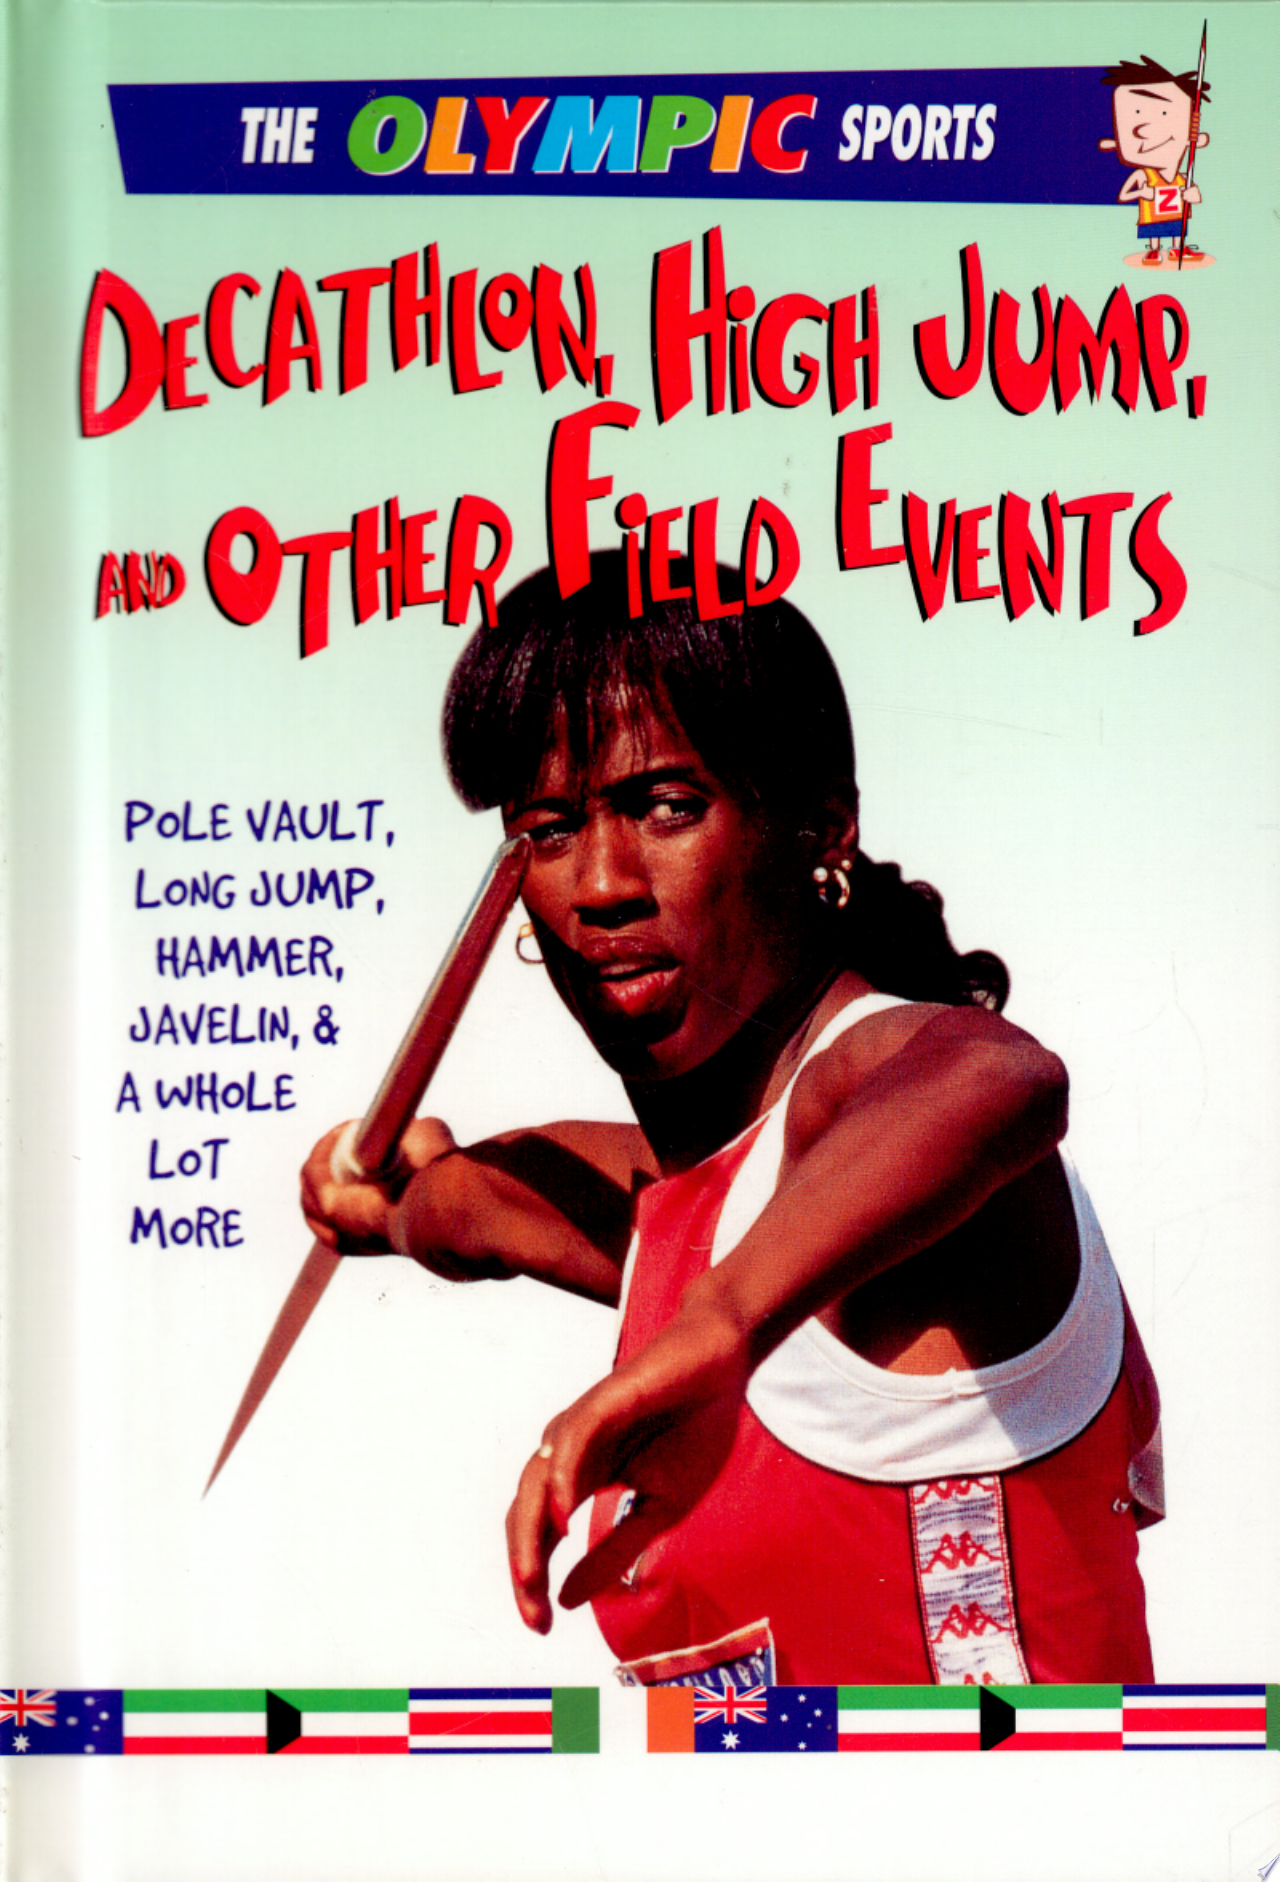 Image for "Decathlon, High Jump, and Other Field Events"